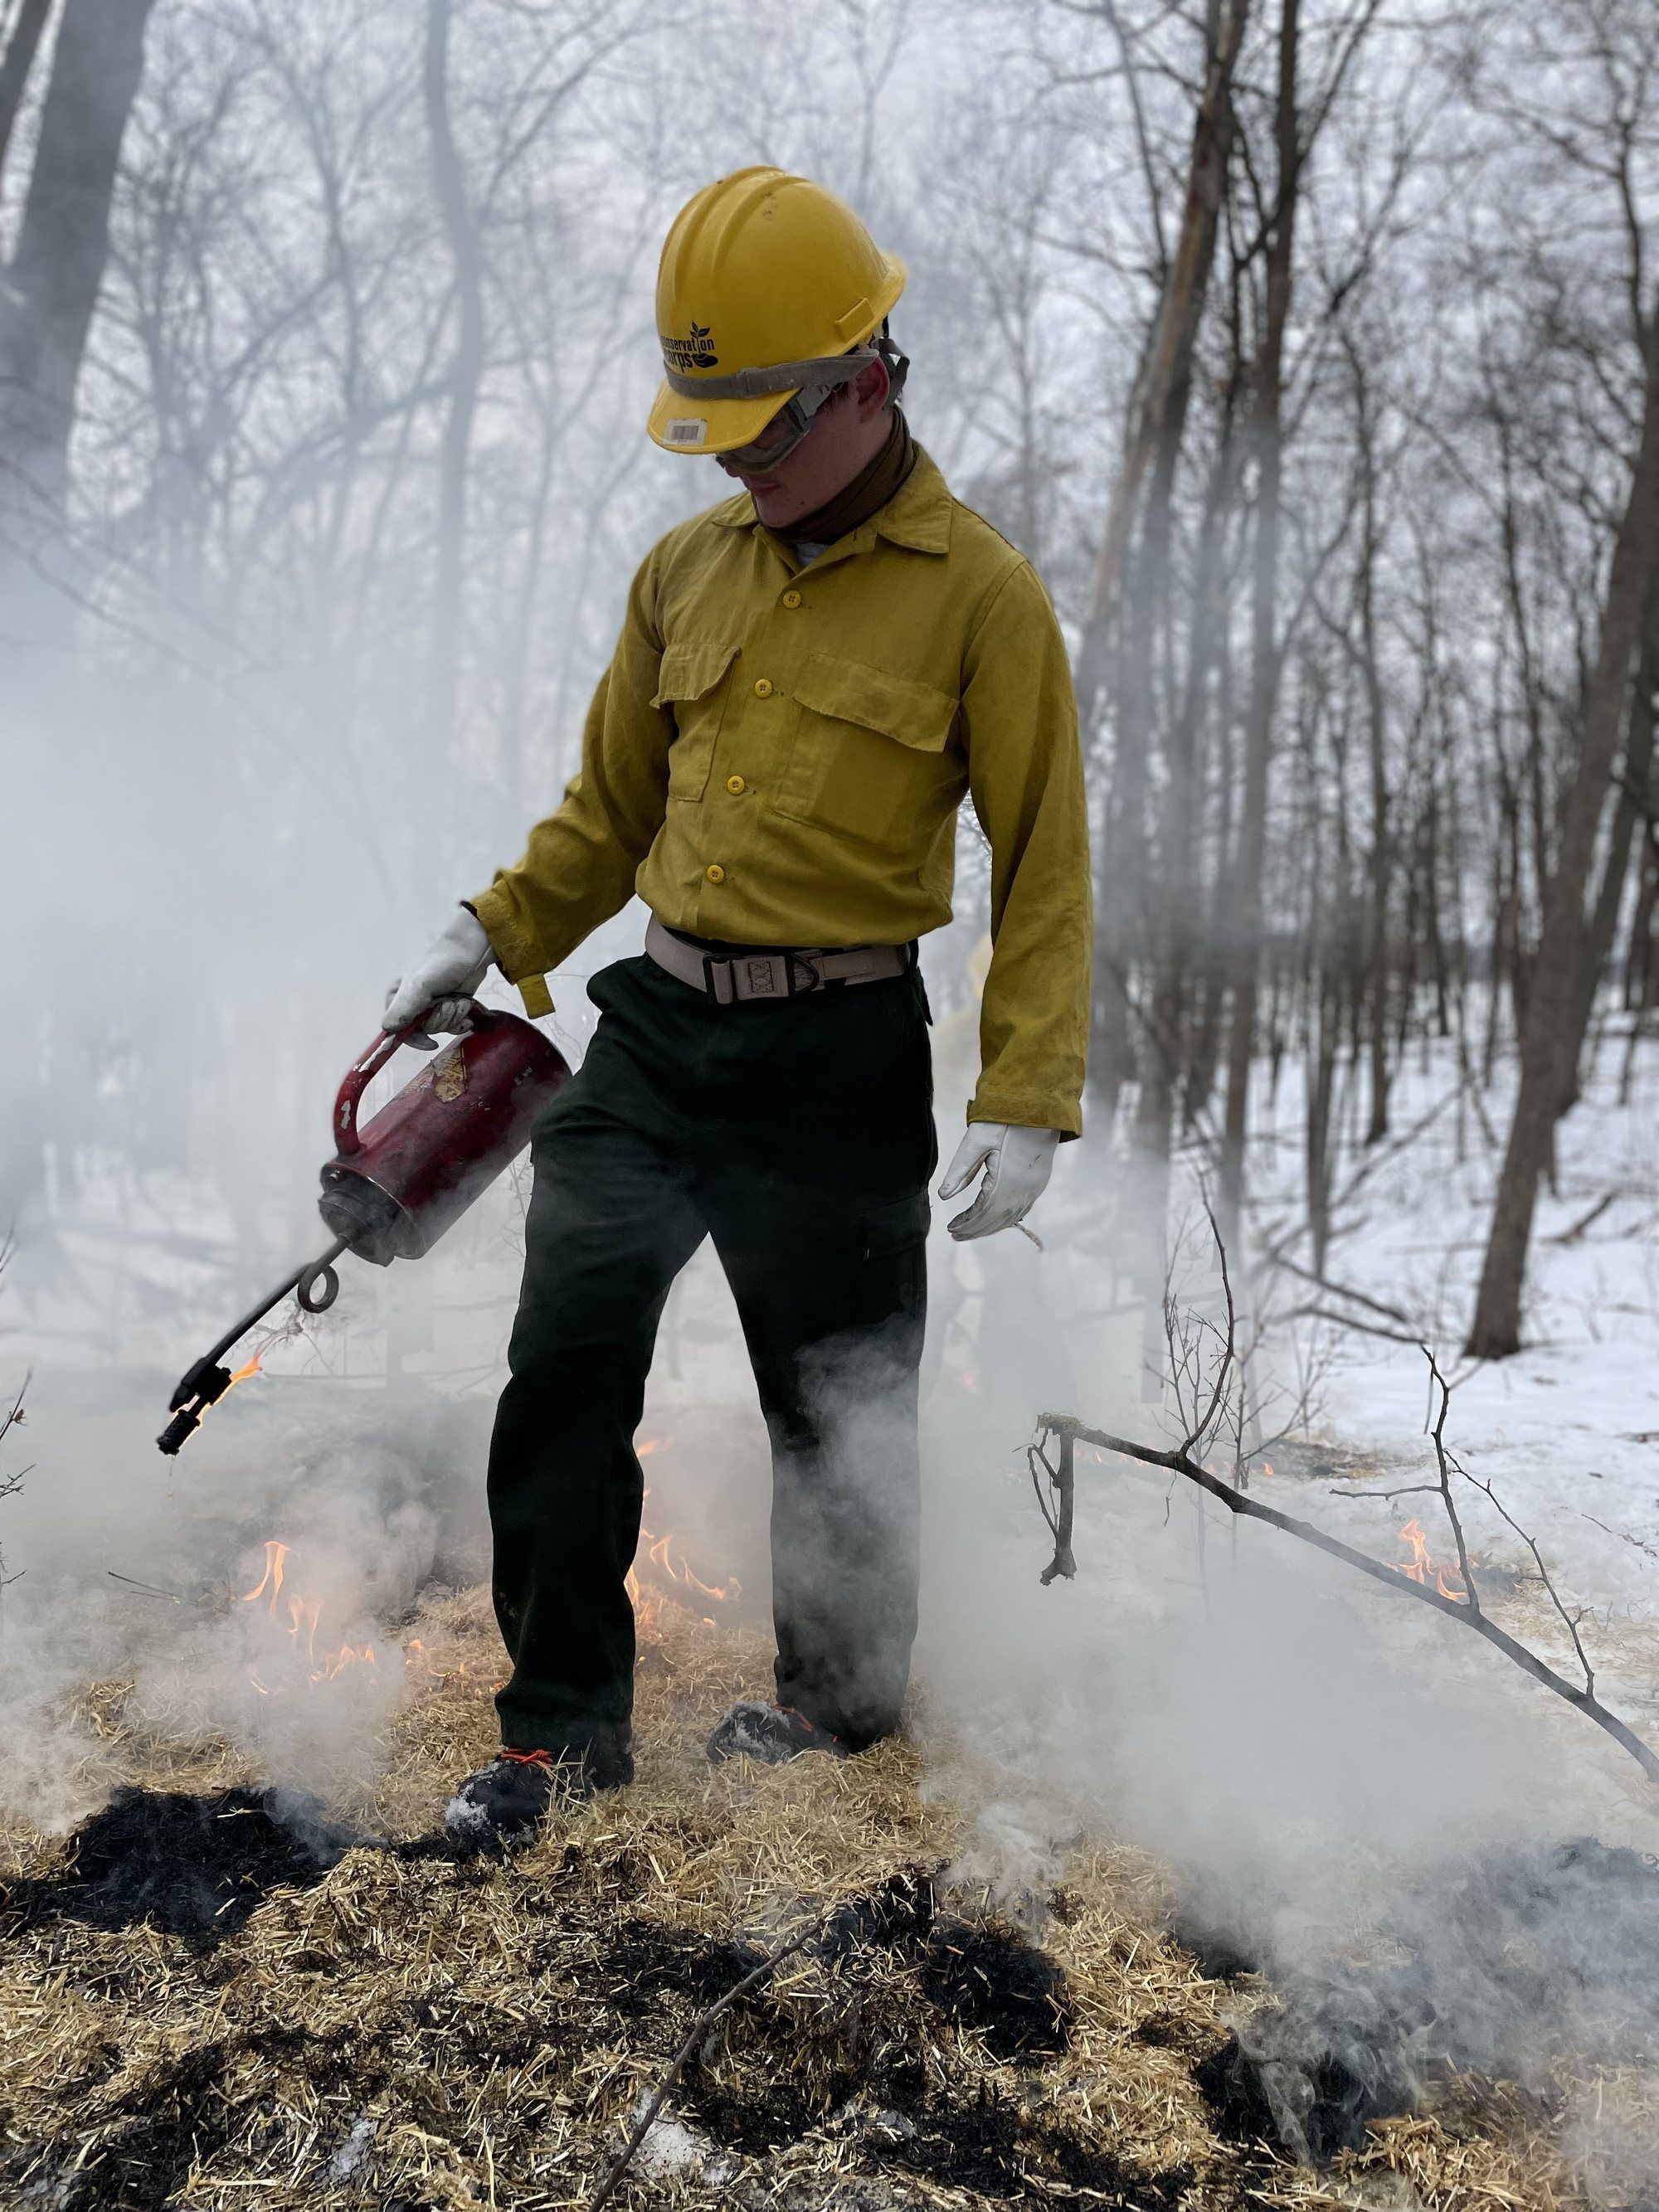 Corpsmember using drip torch to set fire